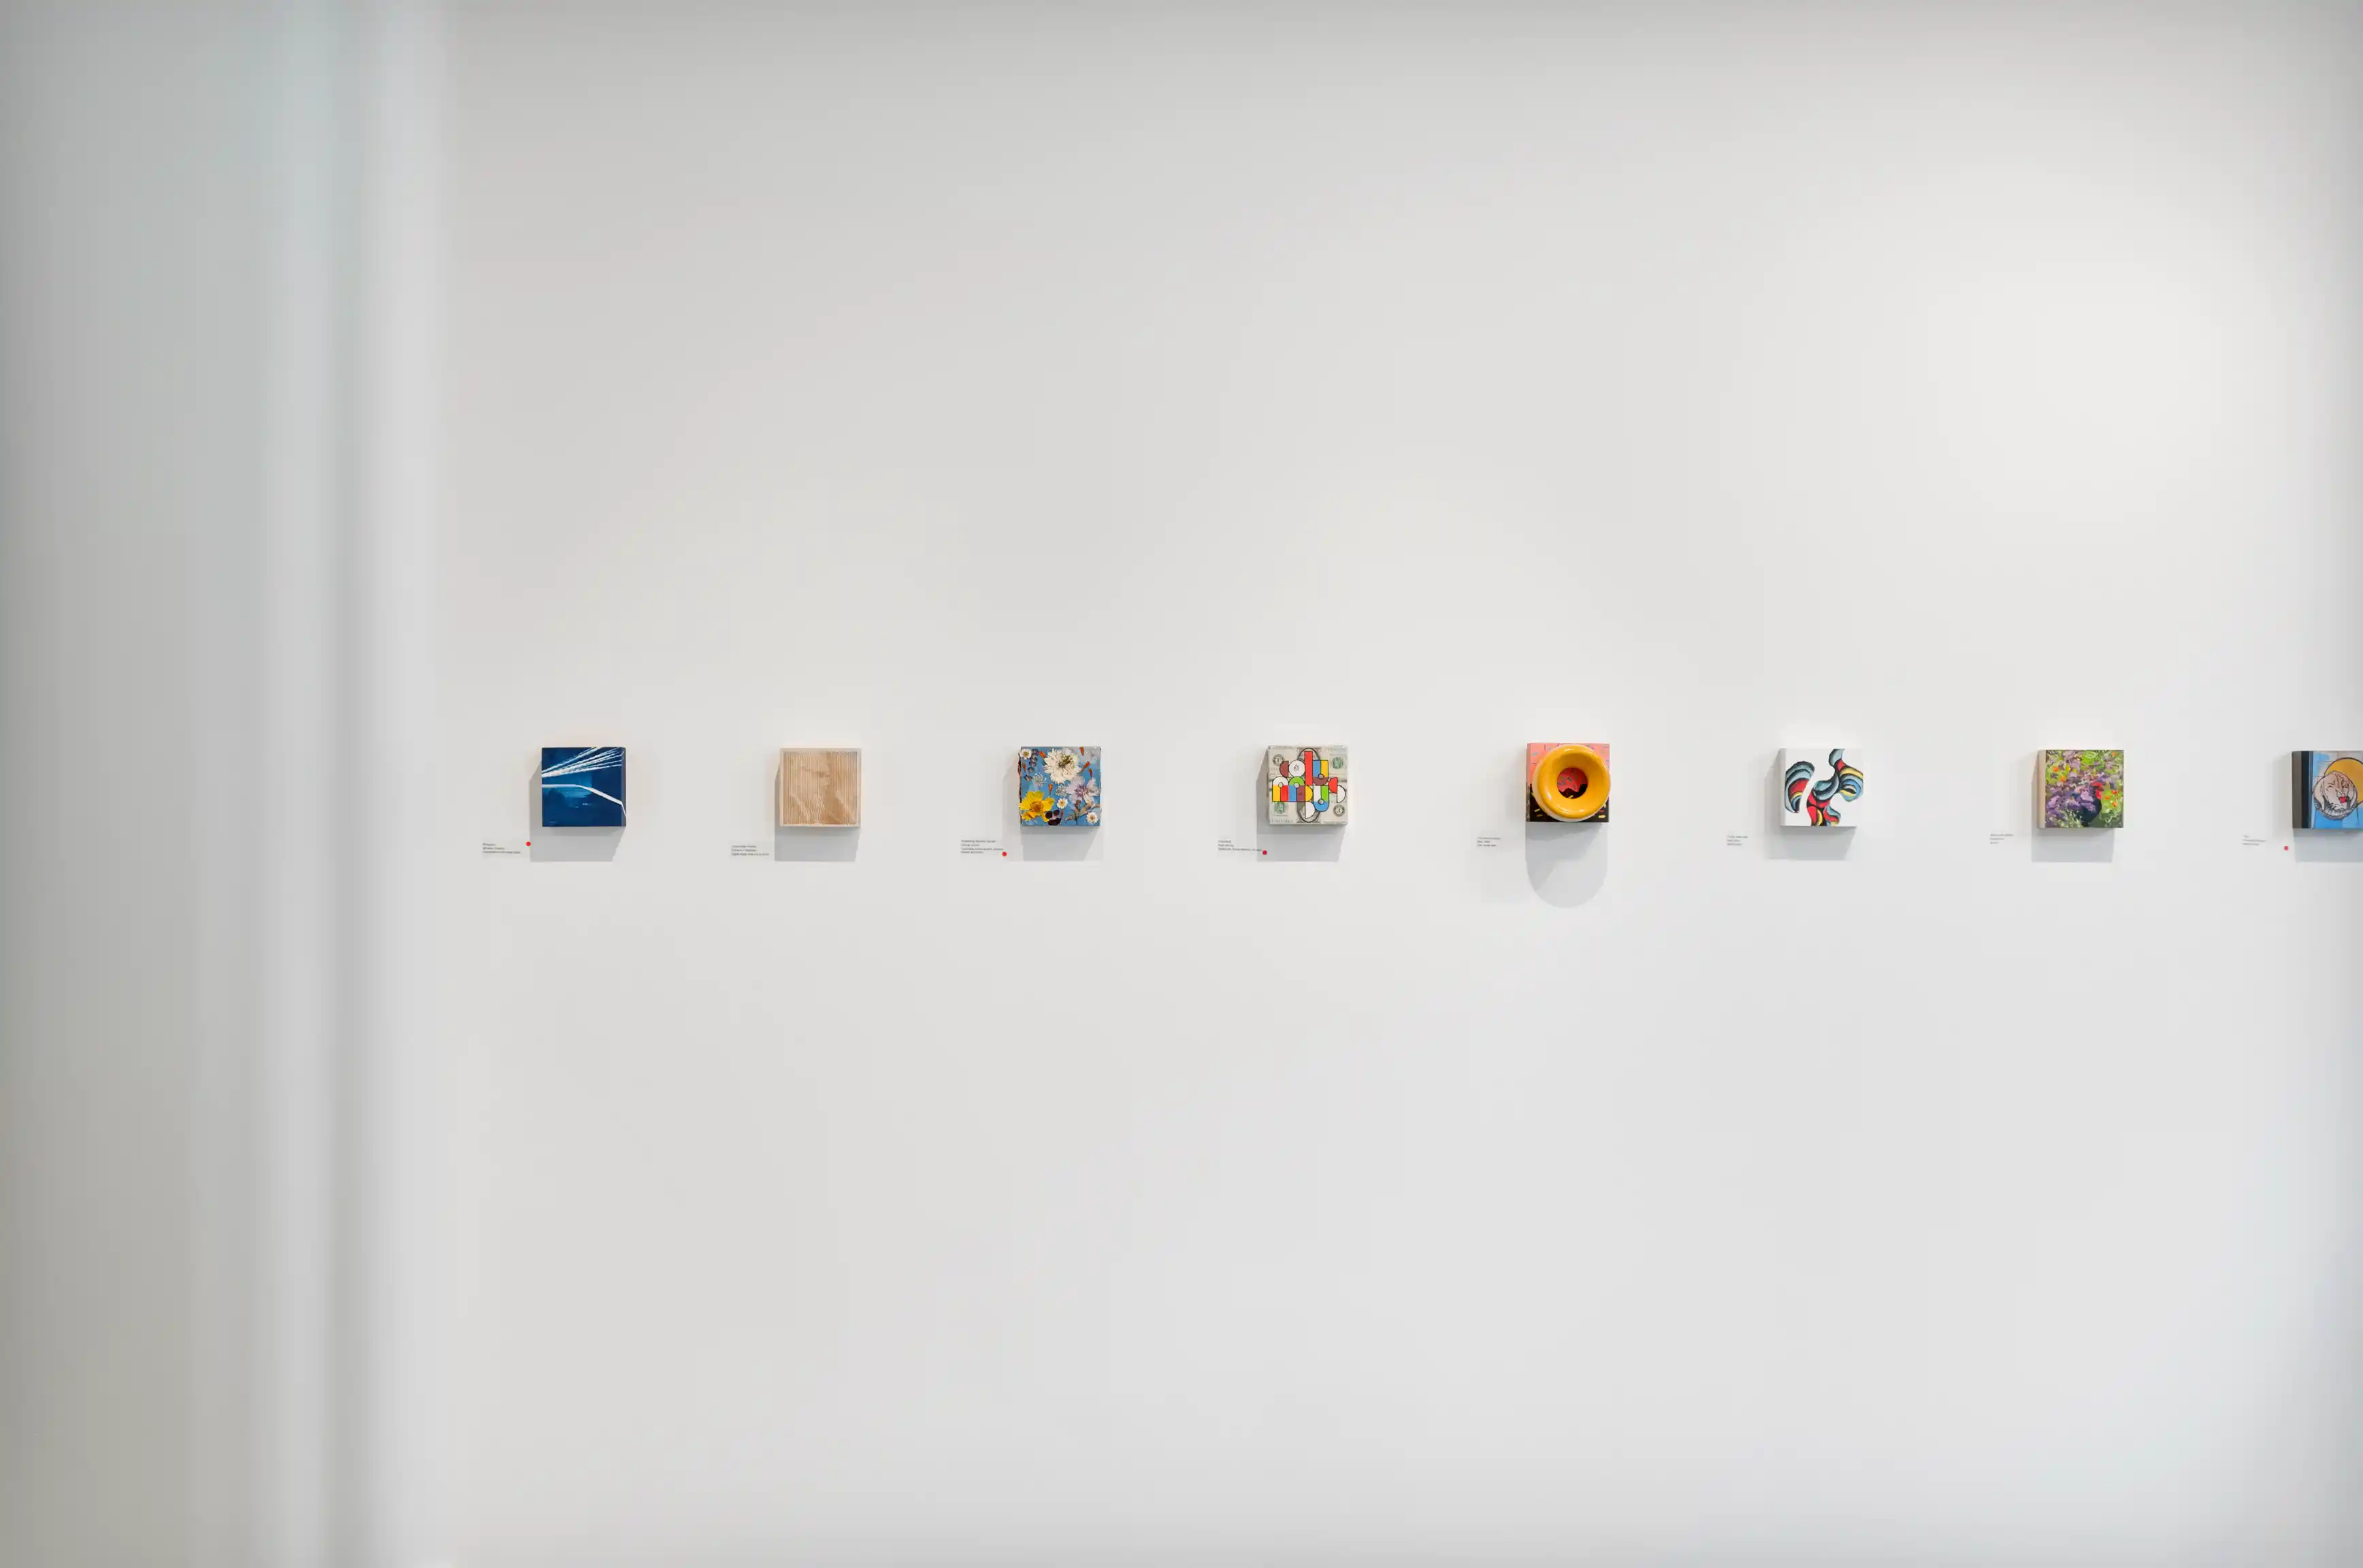 Art gallery wall showcasing a variety of small contemporary artworks with description labels underneath each piece.